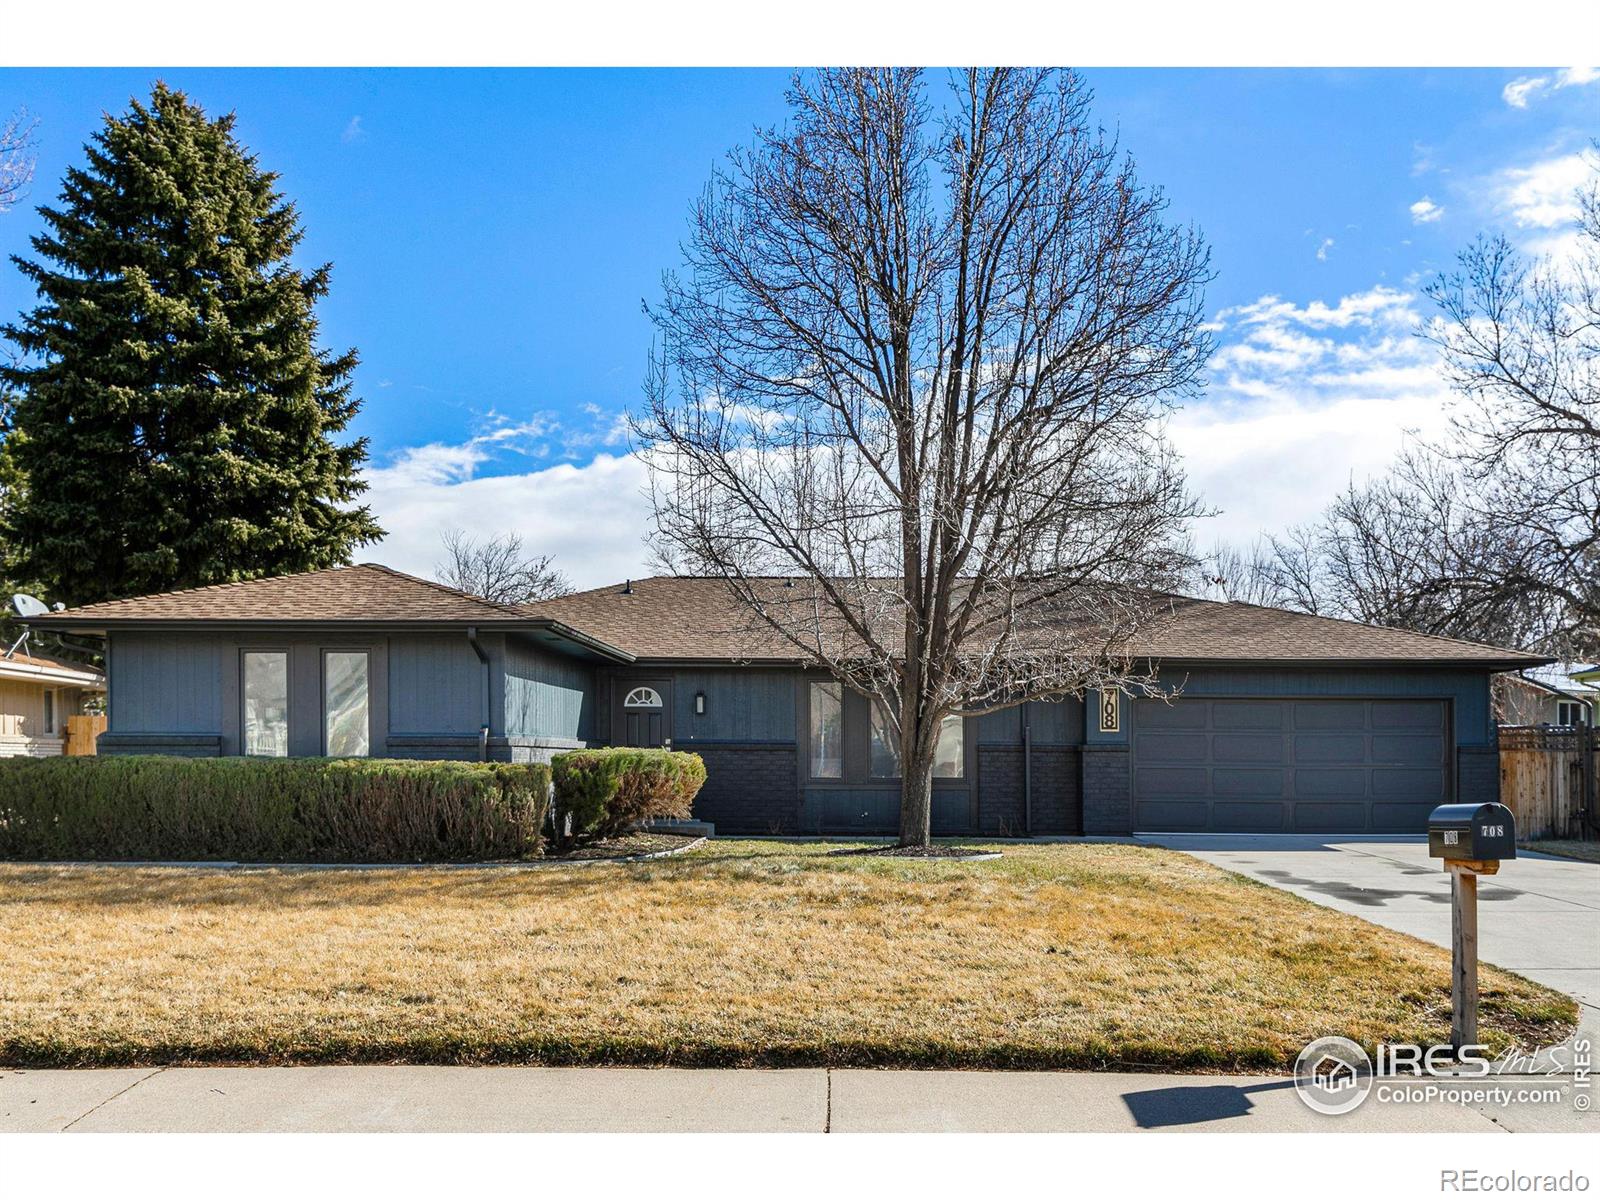 Report Image for 708  Parkview Drive,Fort Collins, Colorado